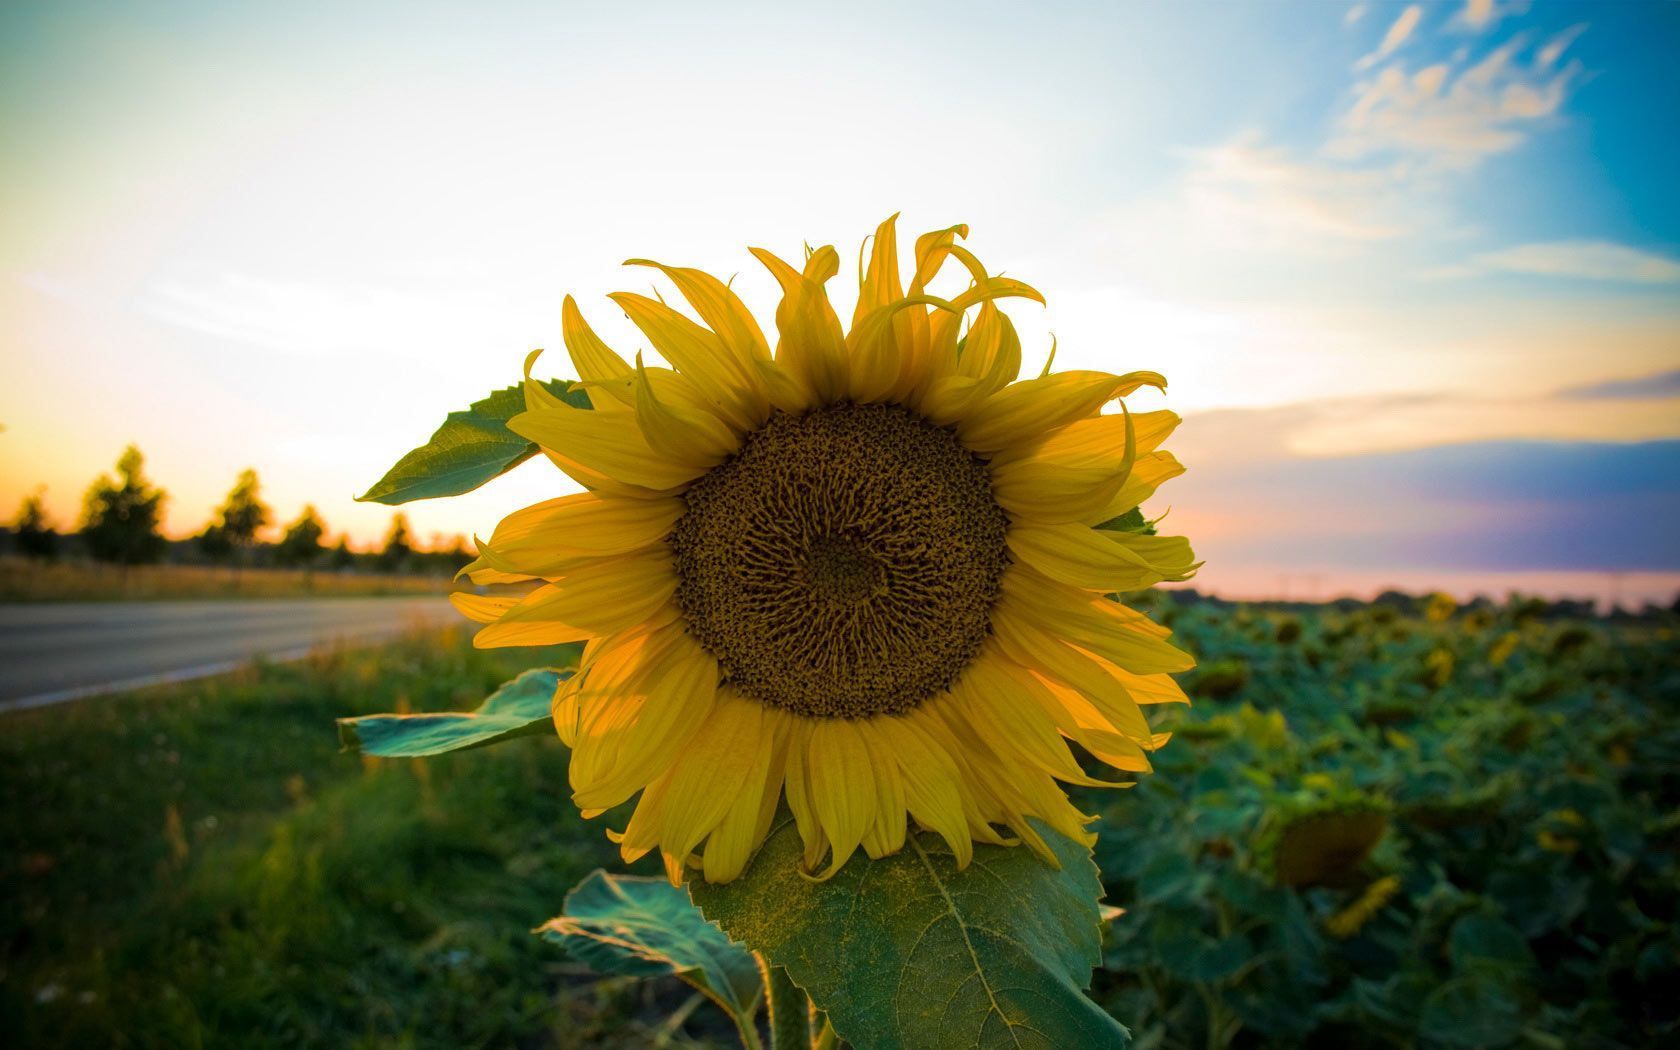 Cool Sunflower Background Screen HD Wallpapers | HD Wallapers for Free